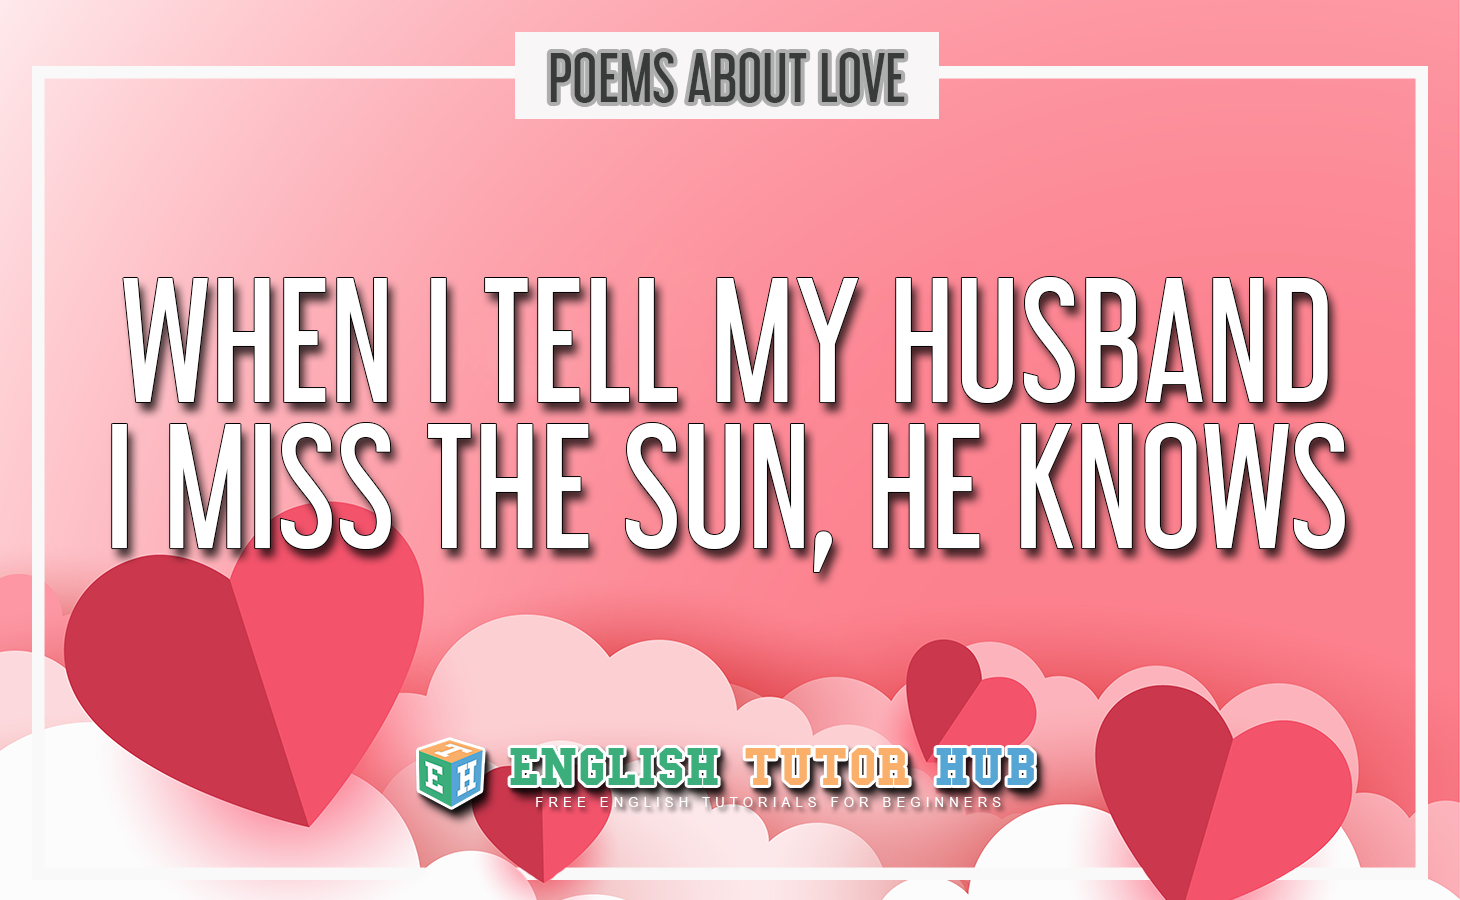 When I Tell My Husband I Miss the Sun, He Knows - Poem About Love